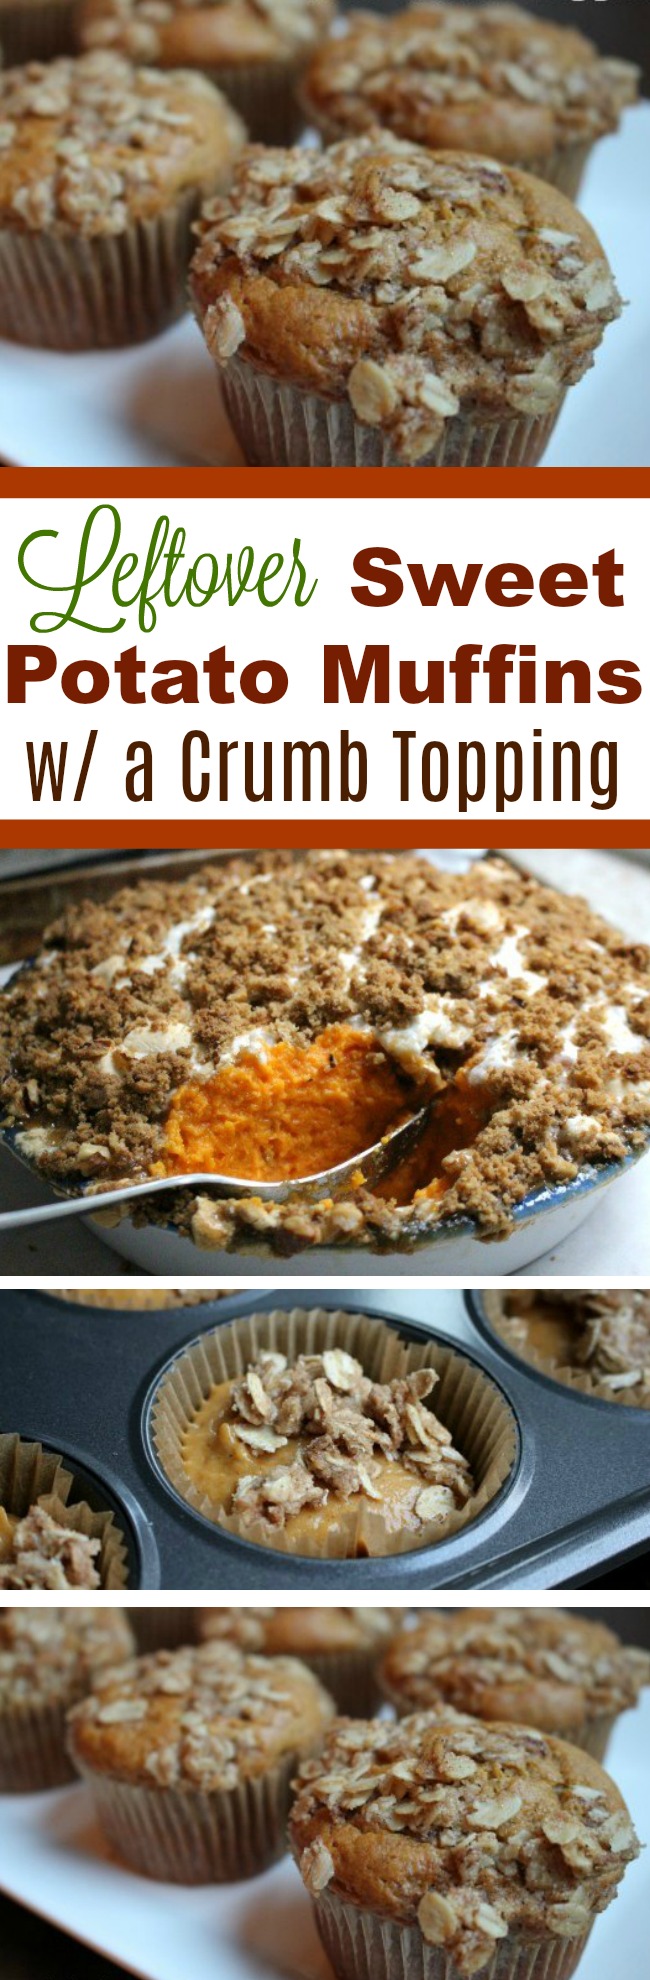 Thanksgiving Leftovers – Sweet Potato Muffins with Crumb Topping